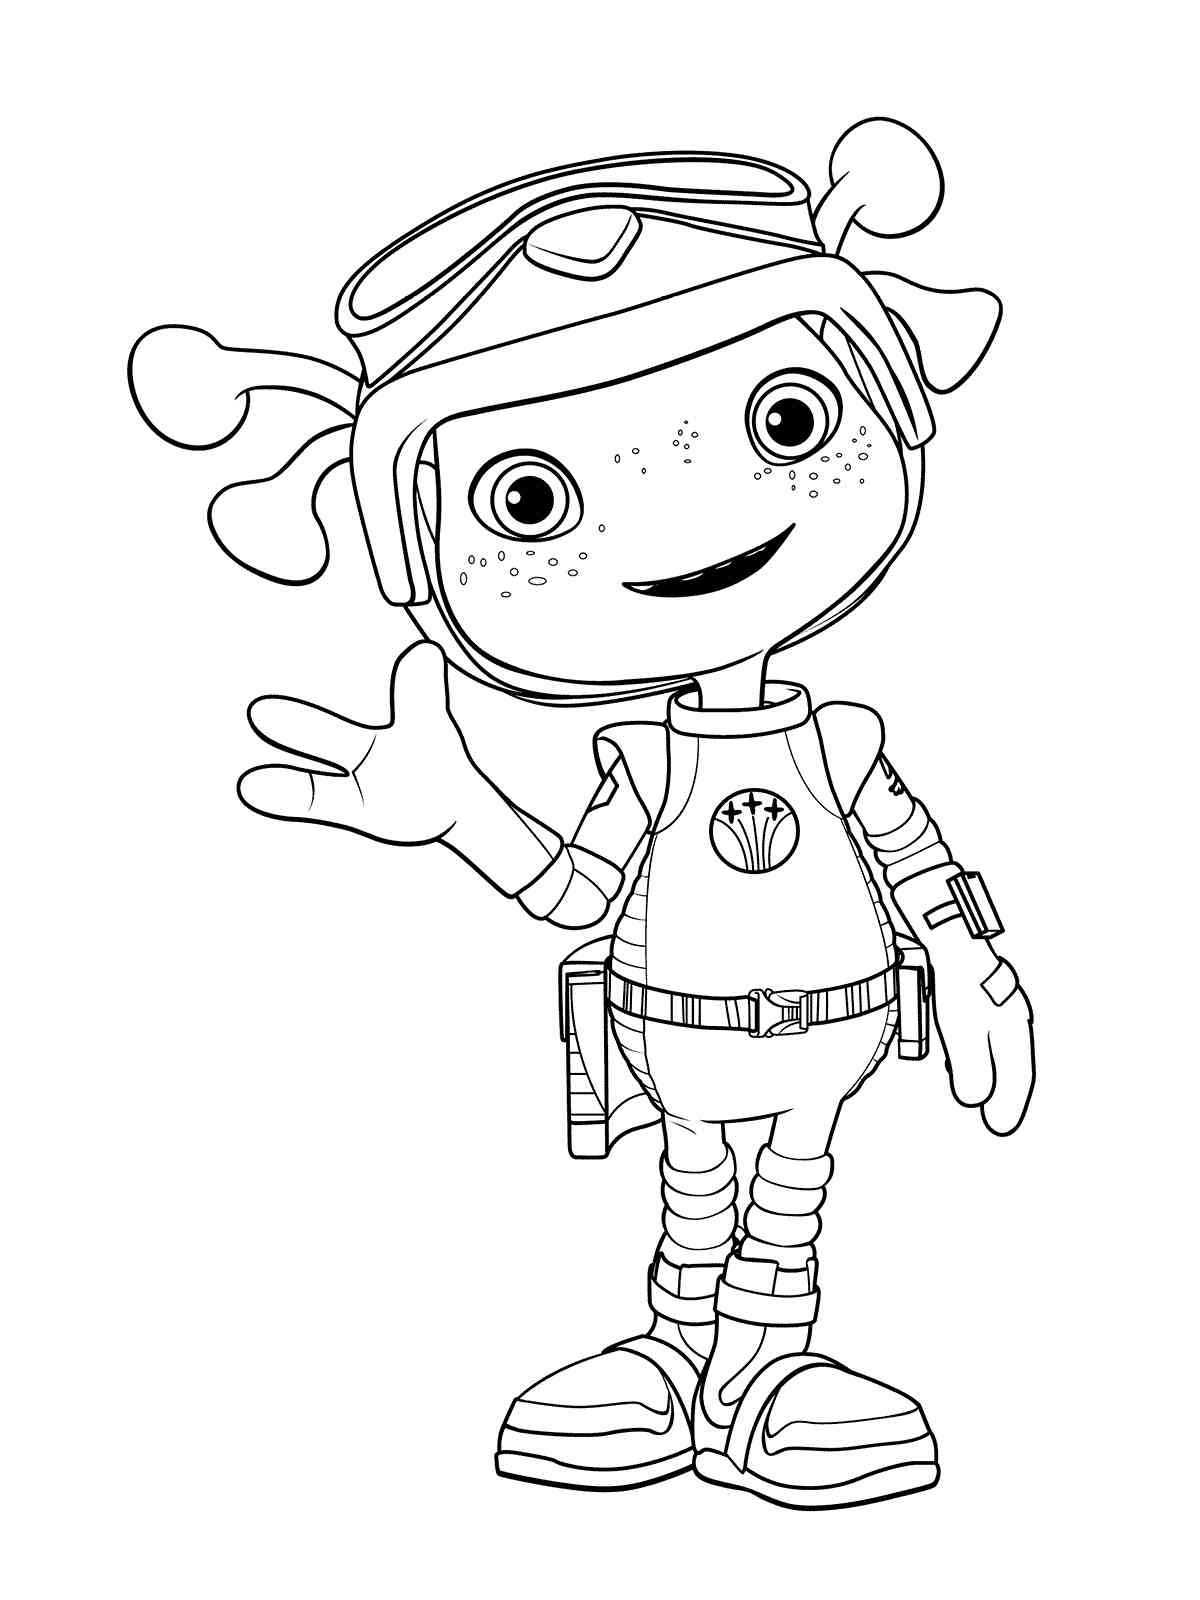 Floogals 1 coloring page